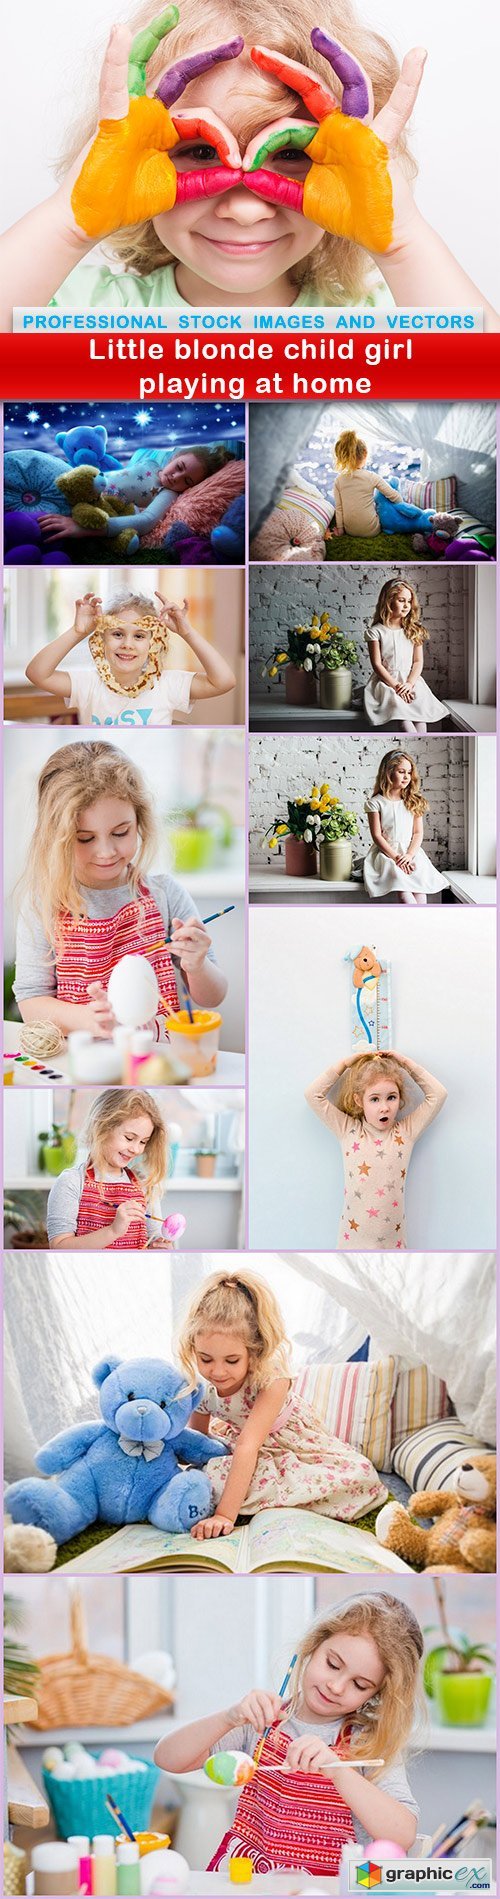 Little blonde child girl playing at home - 11 UHQ JPEG